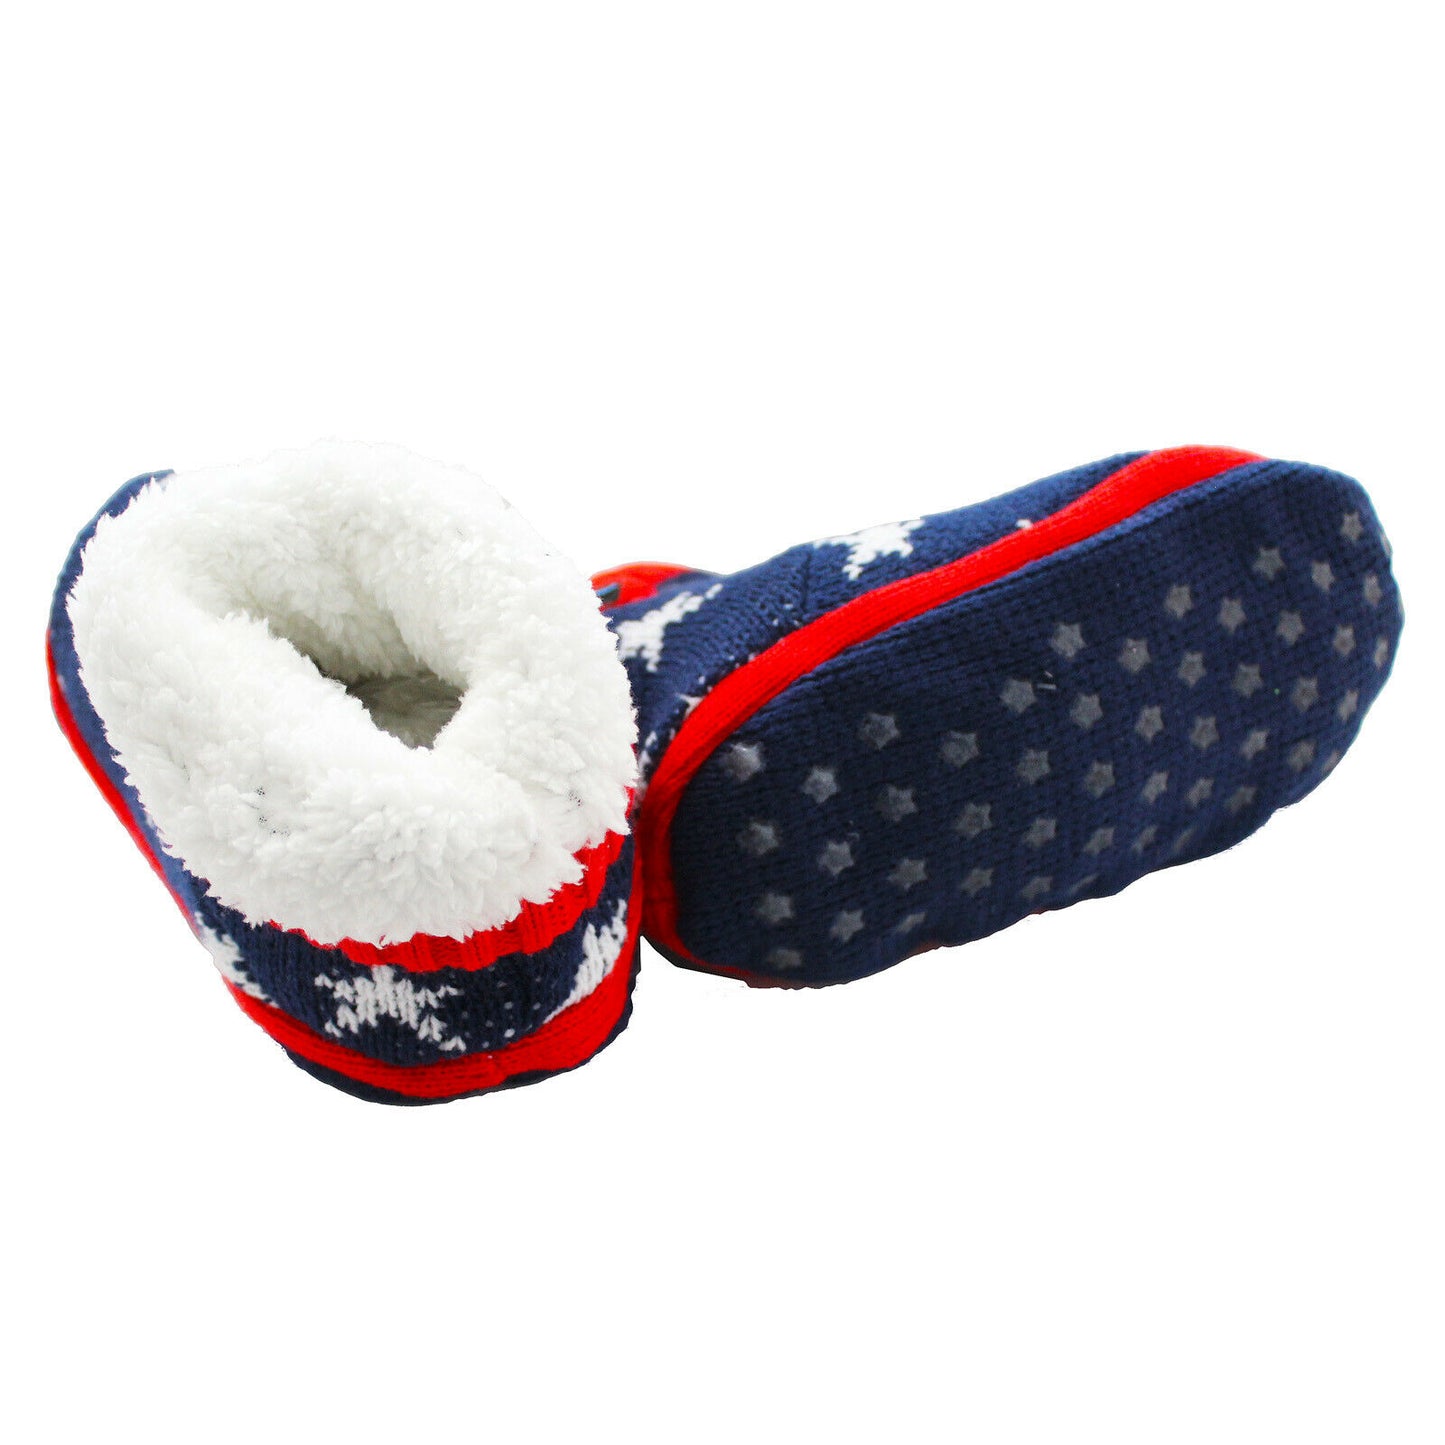 Boys Space-Star Rocket Boots Slippers